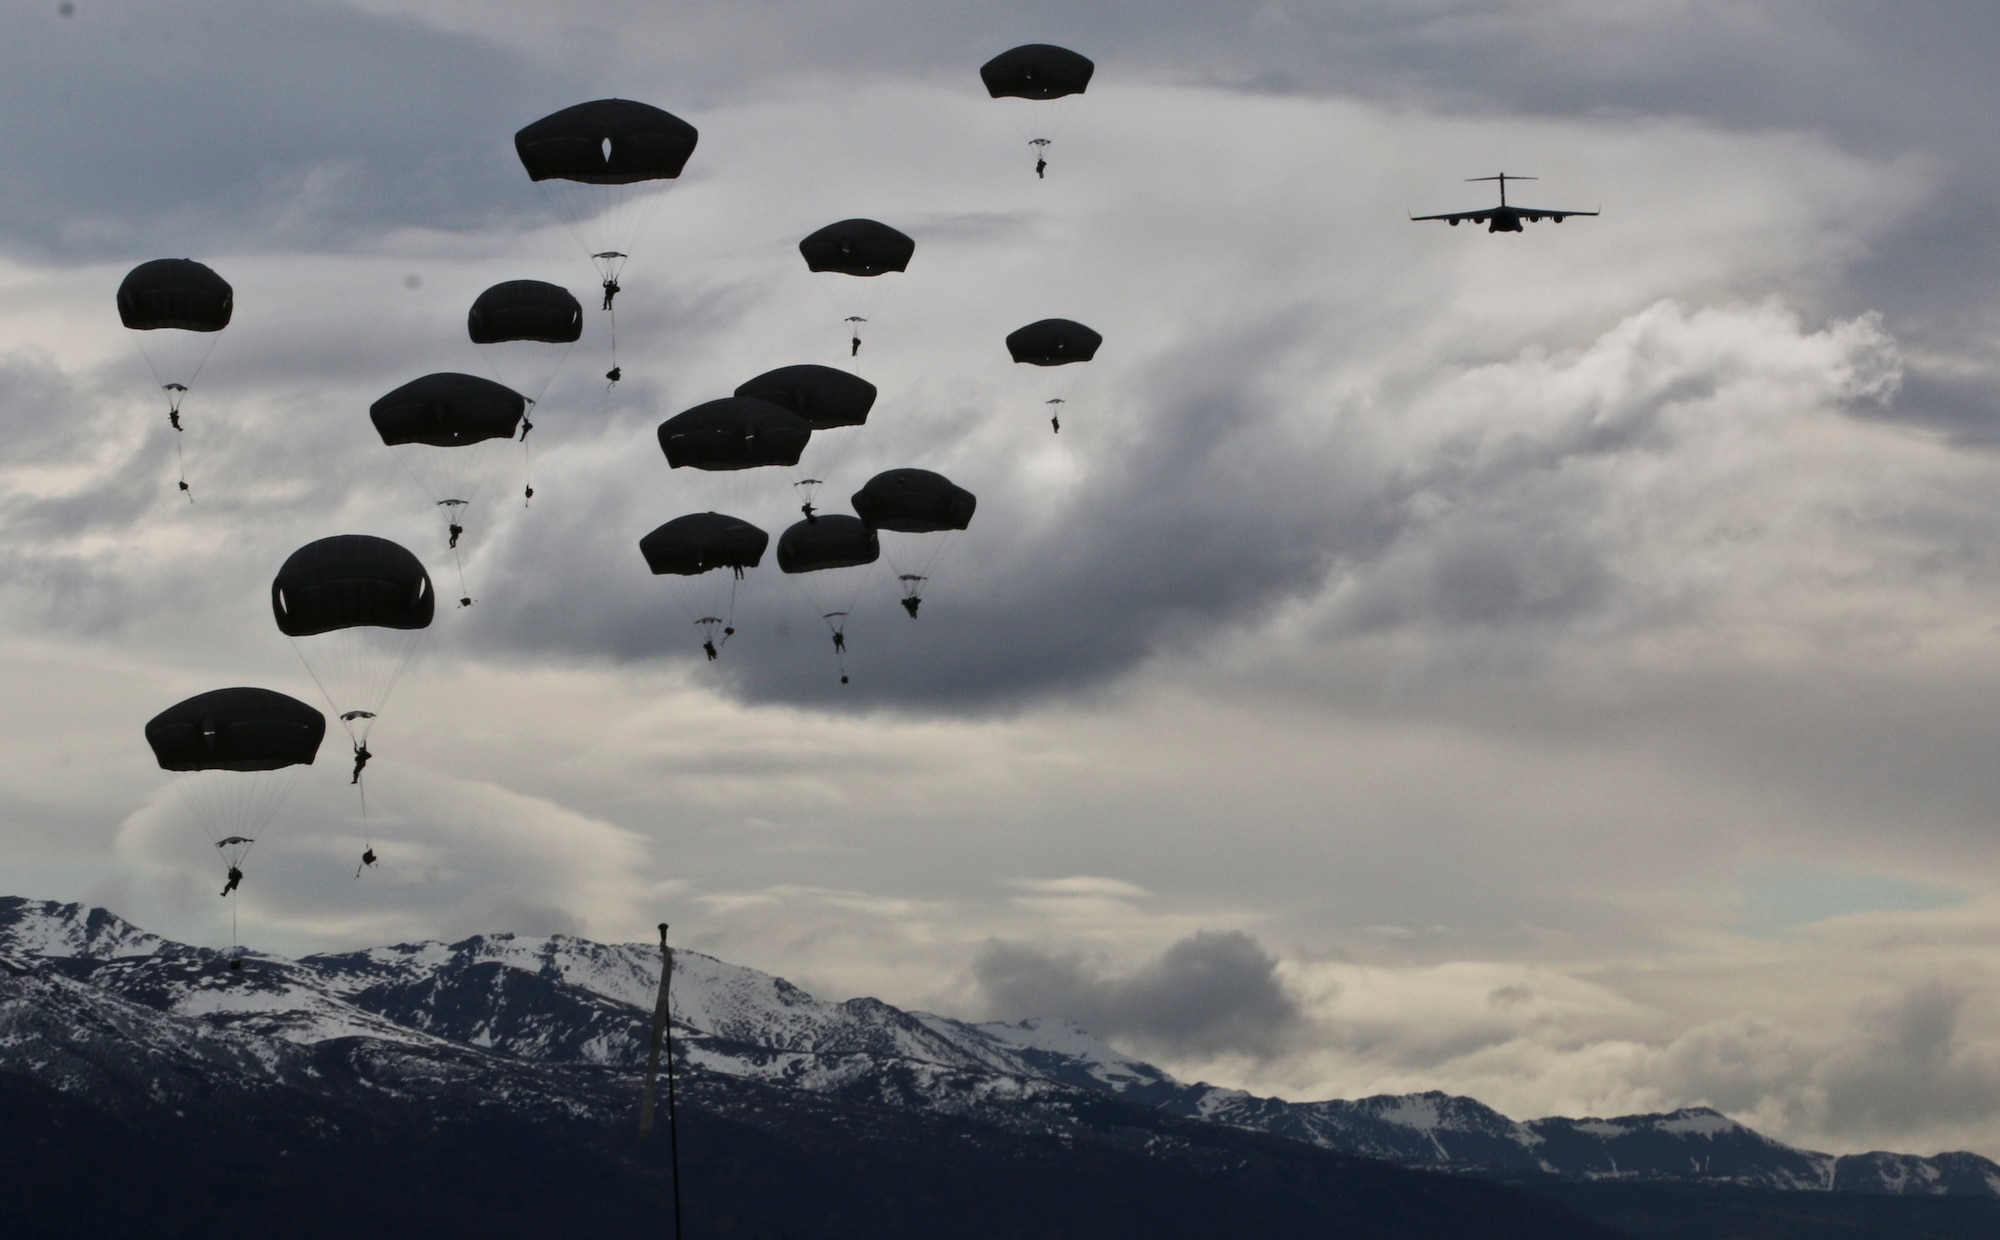 U.S. Army Paratroopers with 2nd Battalion Airborne, 377th Field Artillery, 4th Infantry Brigade Combat Team Airborne, 25th Infantry Division participate in an airborne operation at Malemute Drop Zone, Joint Base Elemendorf-Richardson, Alaska, April 5, 2016. (U.S. Army photo by Staff Sgt. Brian Ragin)